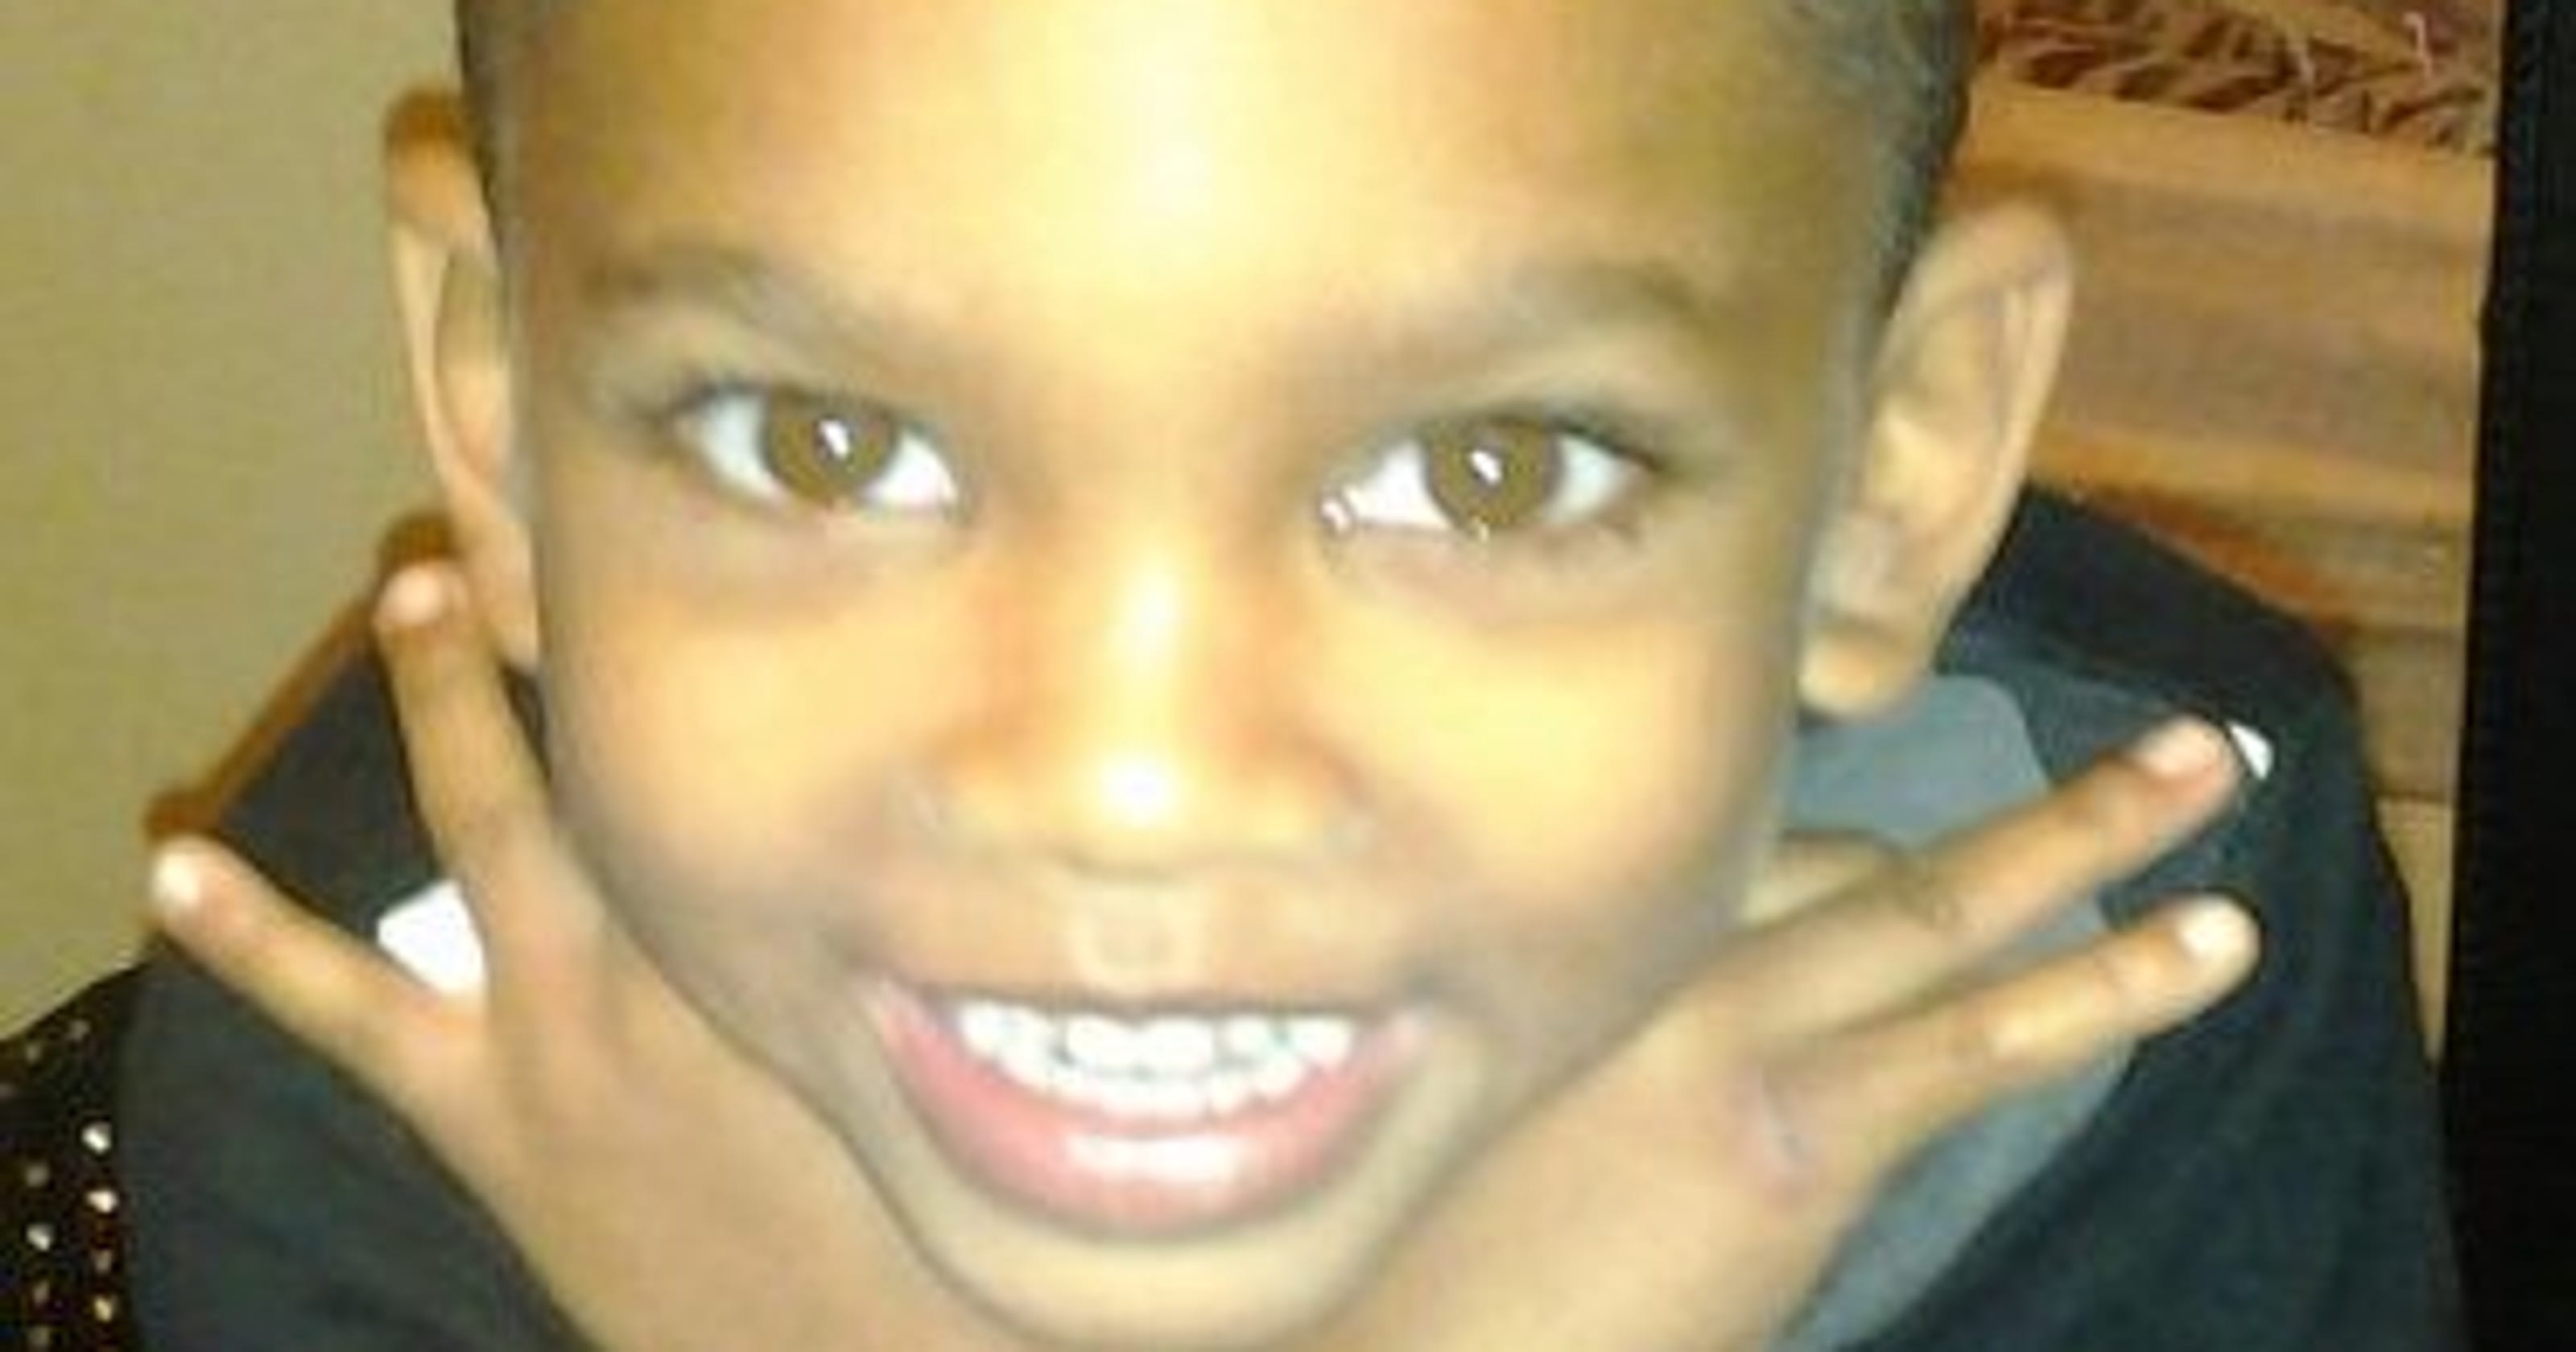 Parents of fatally shot boy question criminal charges